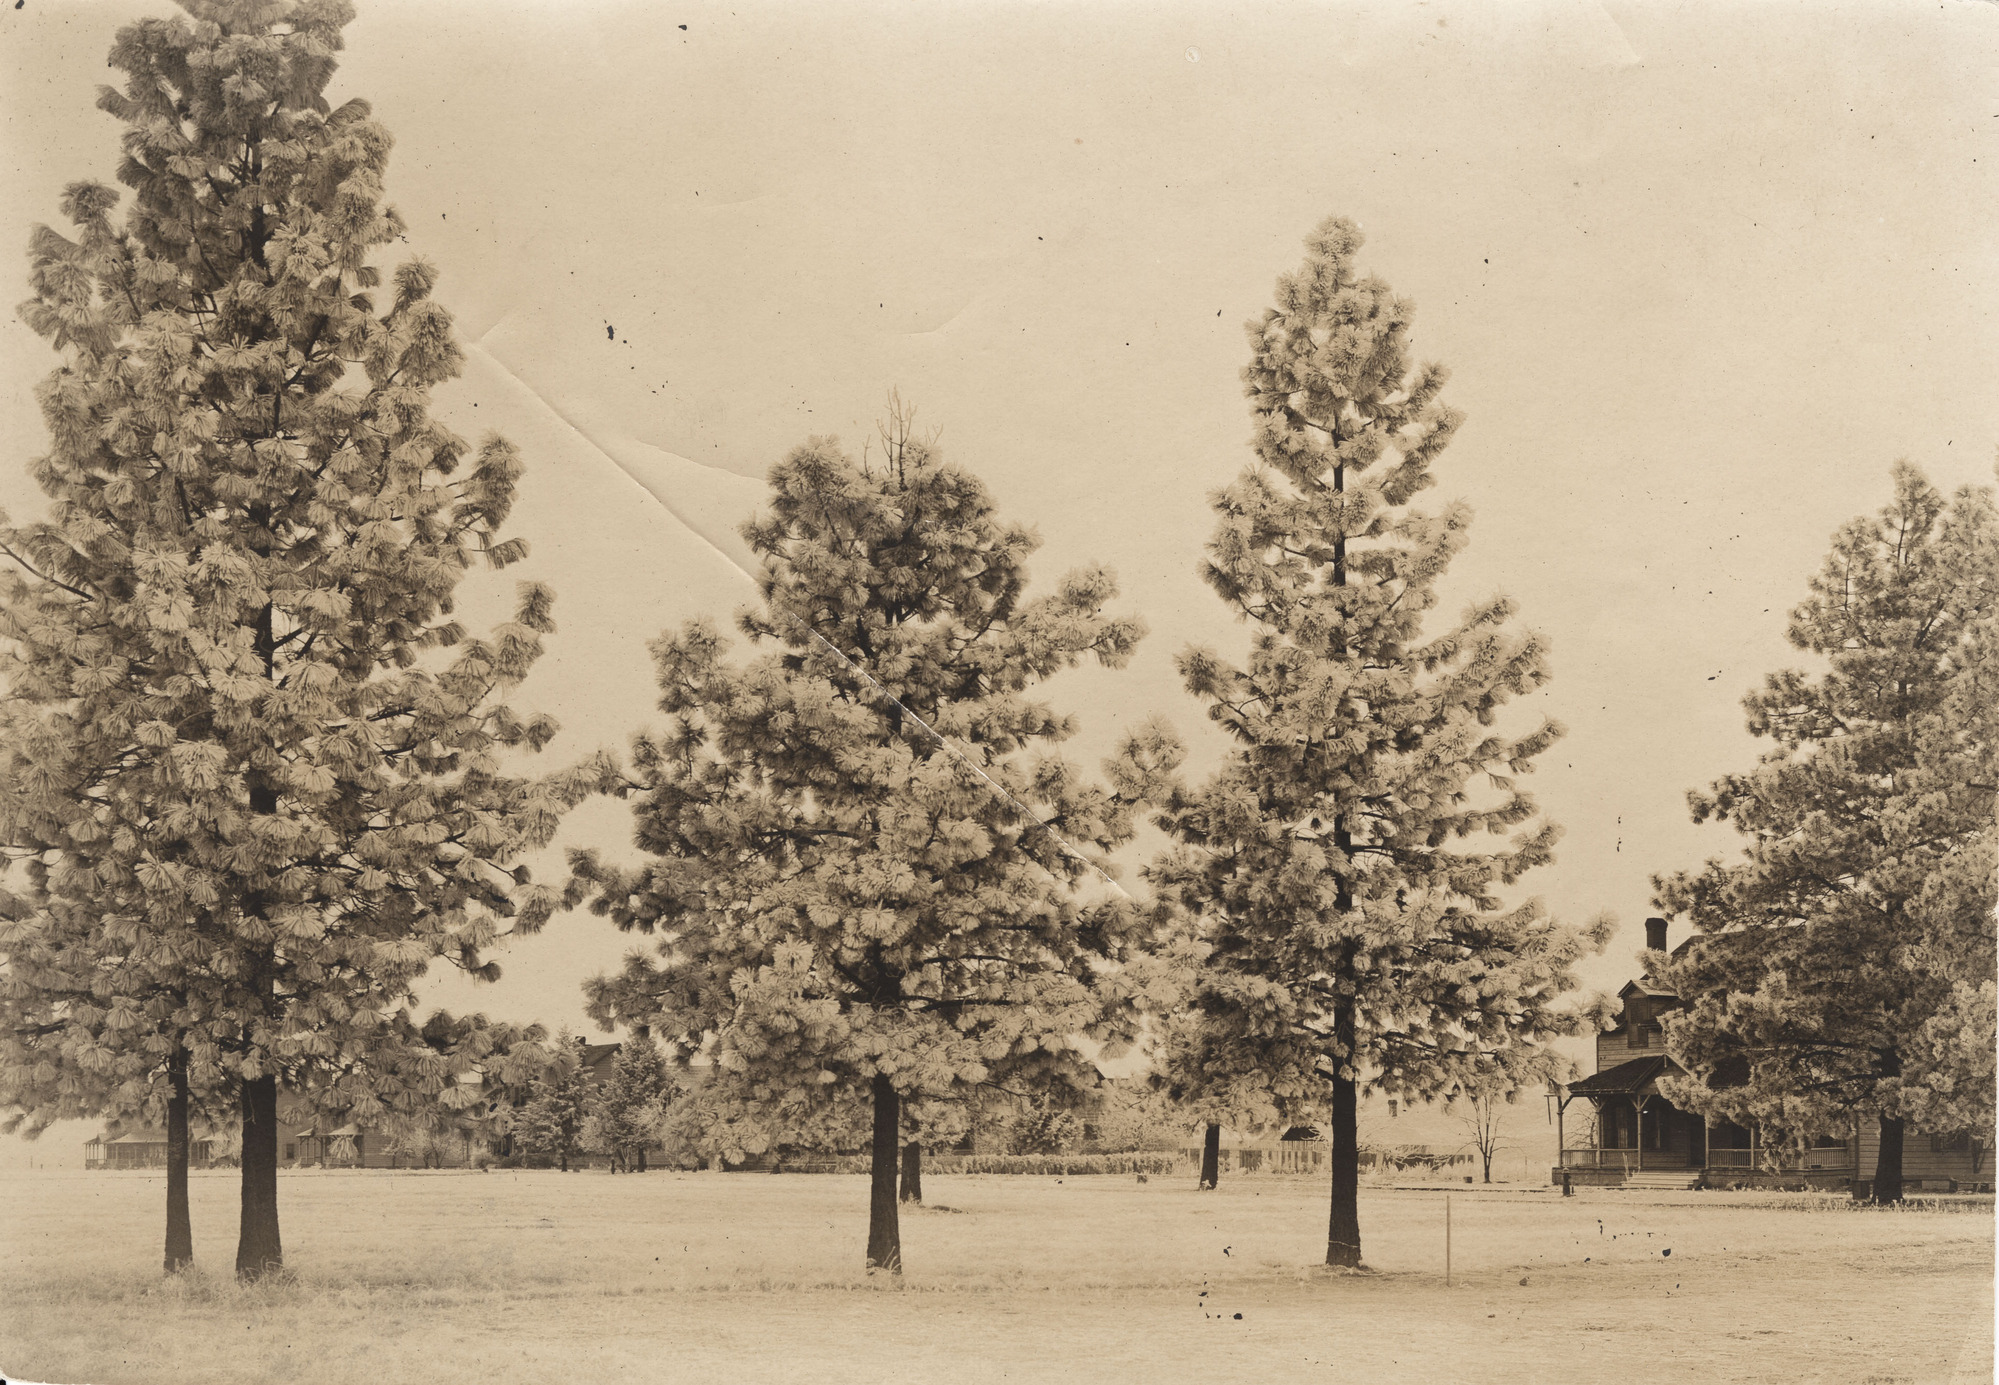 Black and white photograph of trees in a clearing with buildings in the background